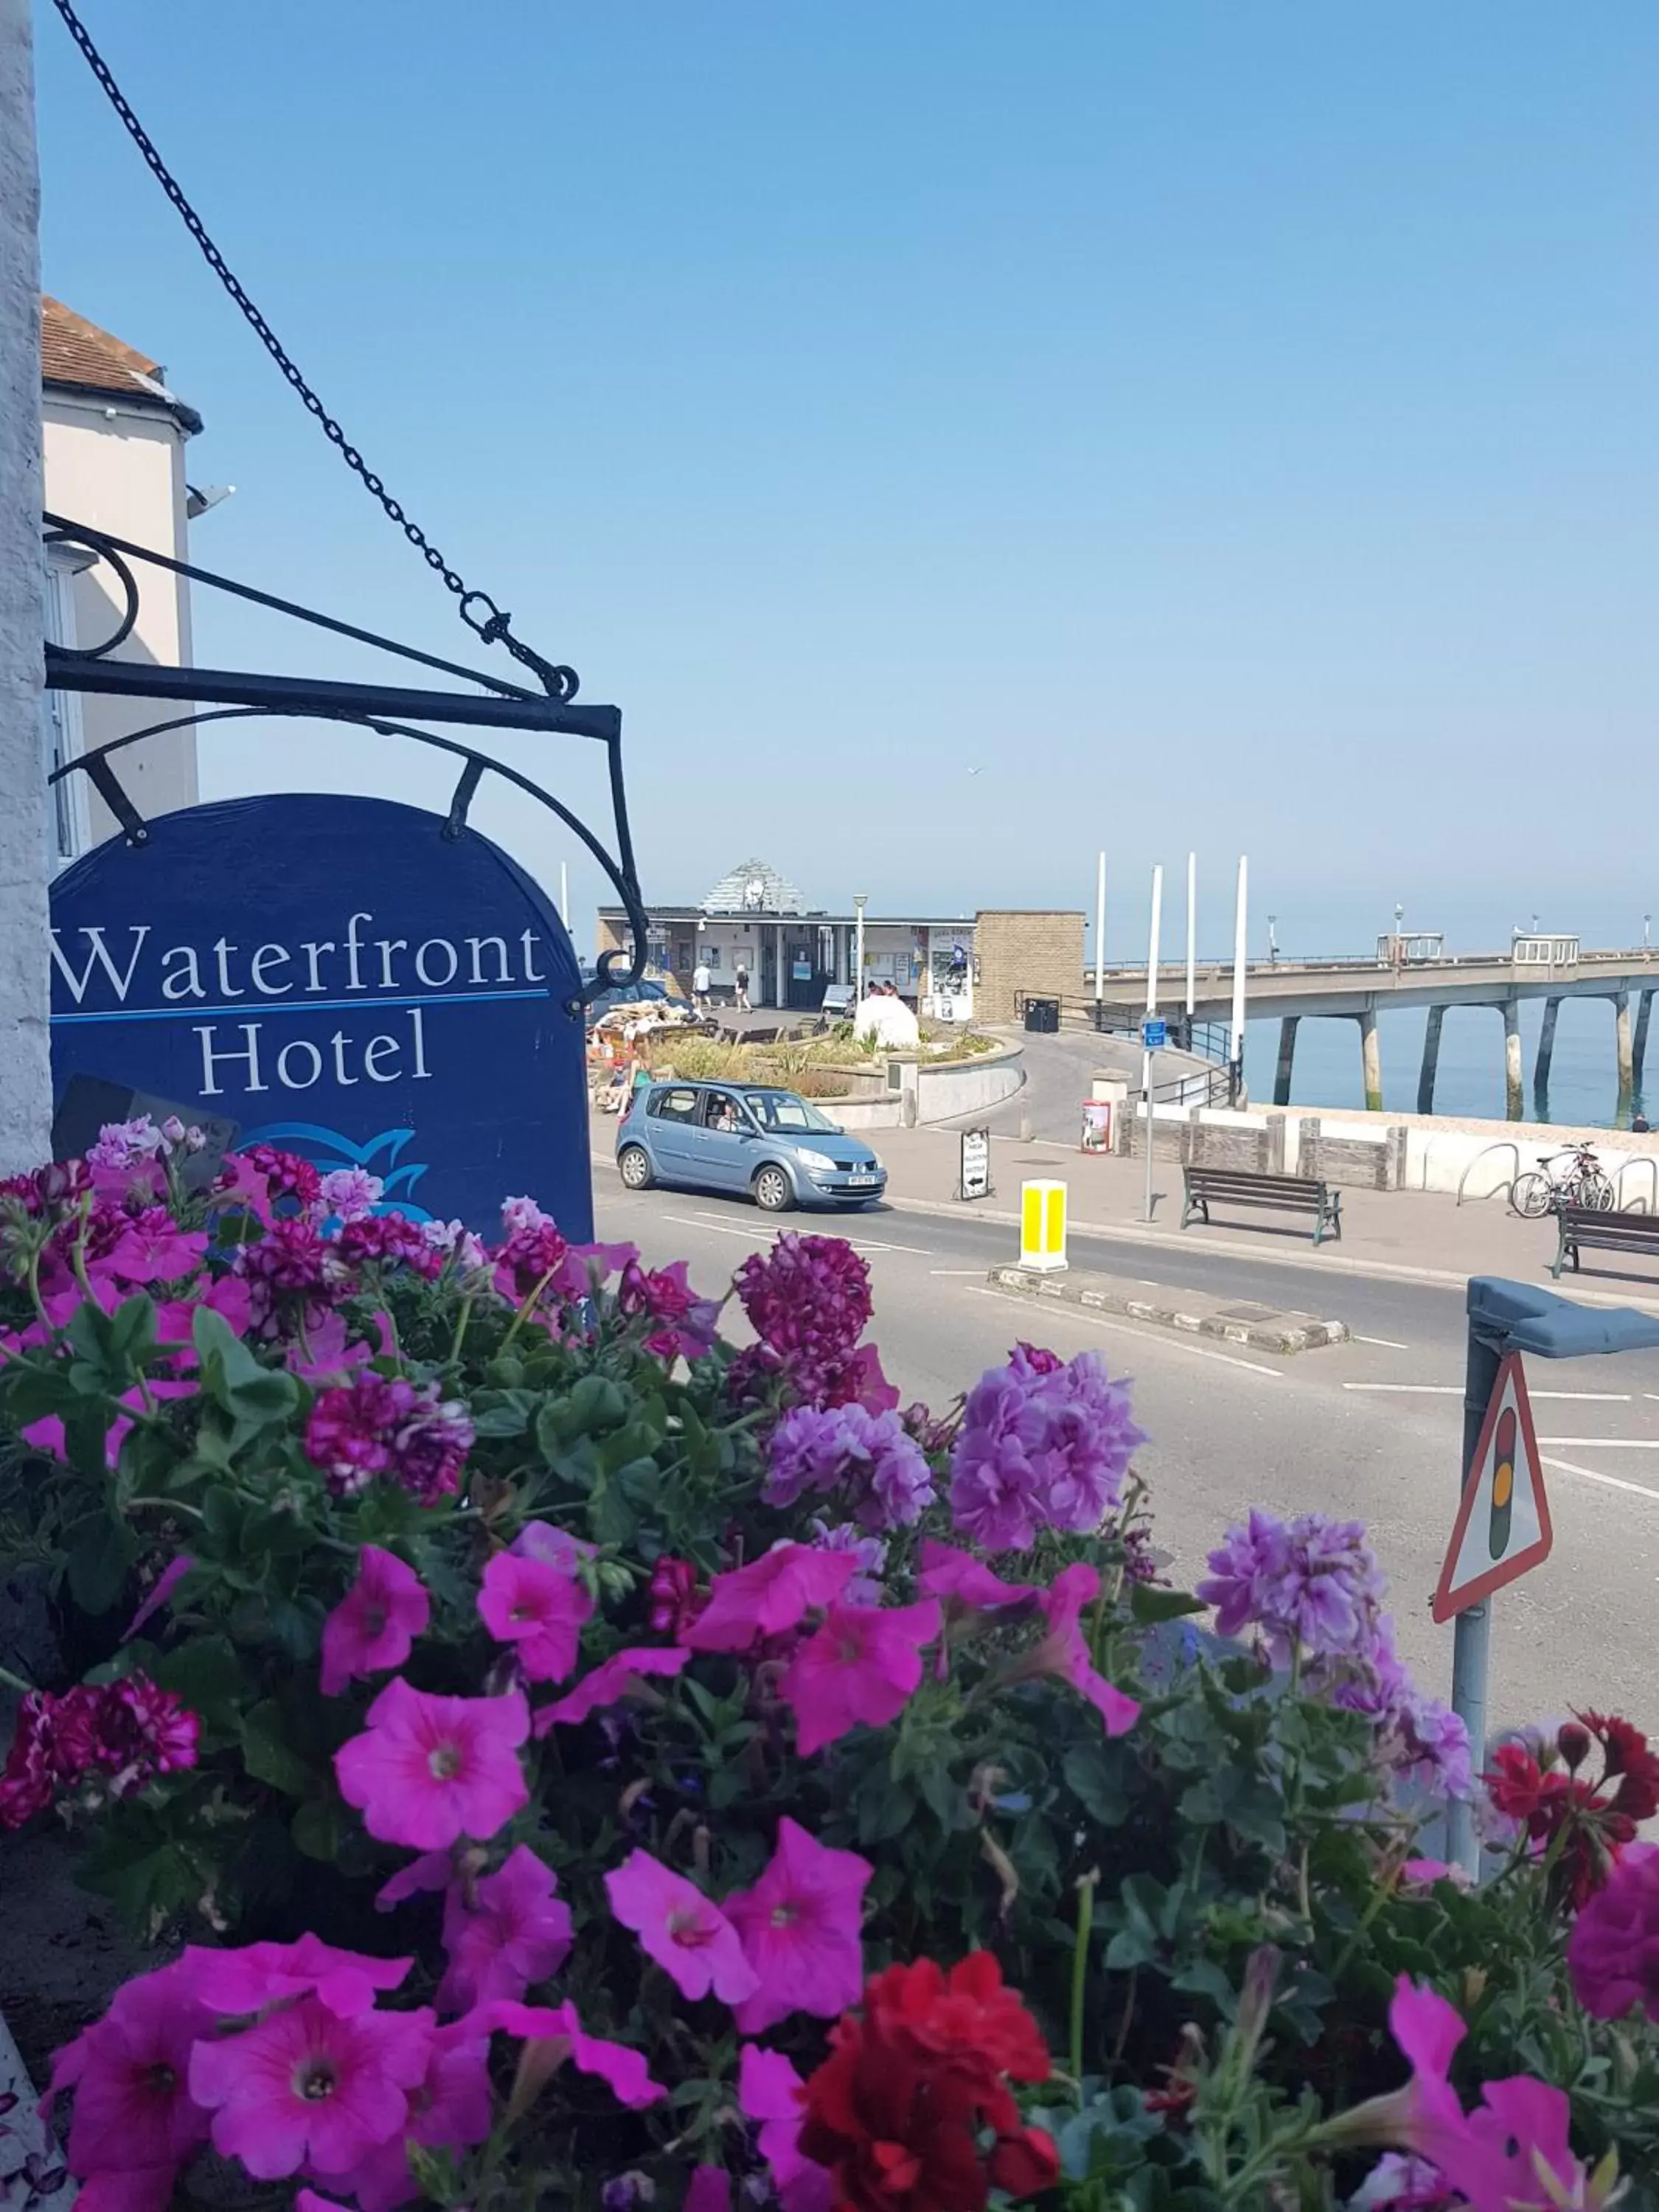 Day in Waterfront Hotel